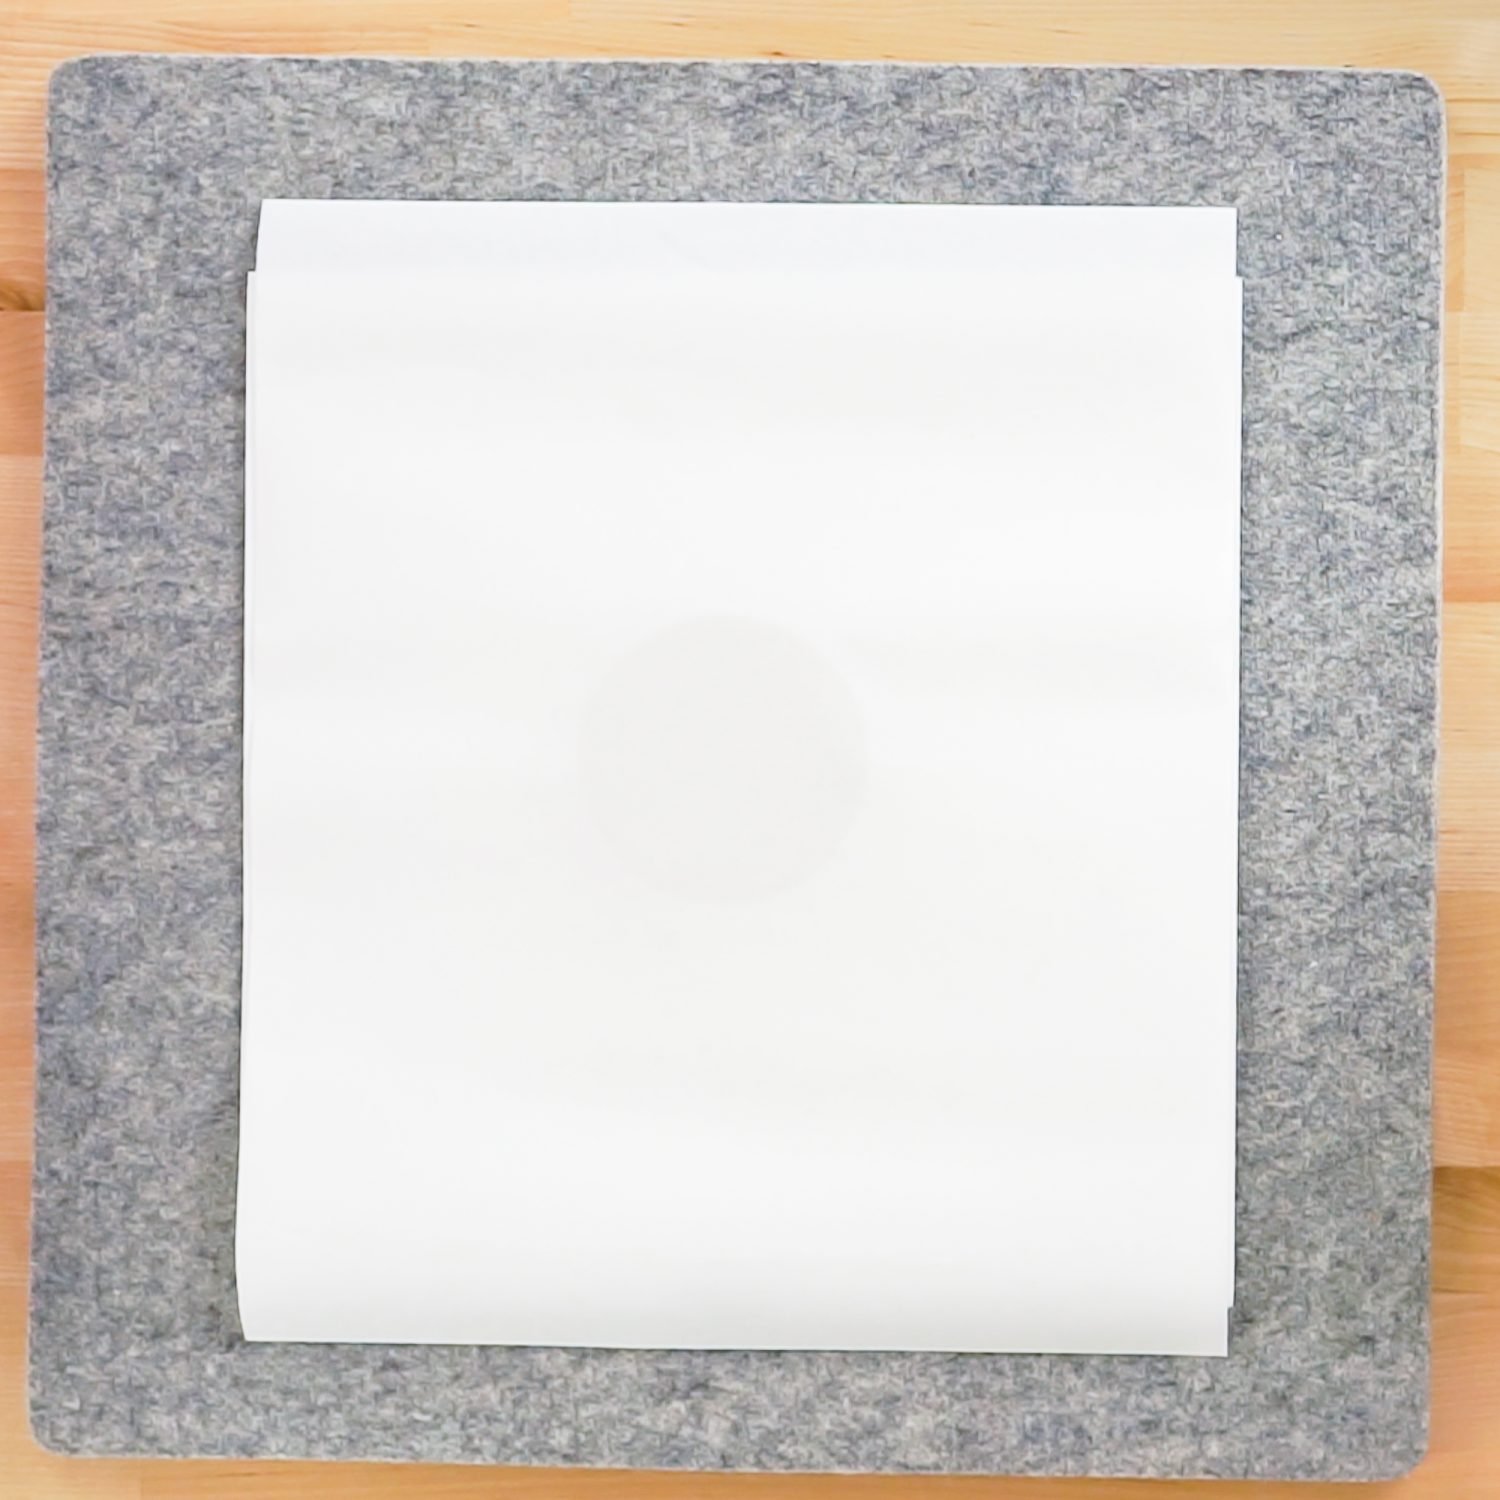 Image of a Cricut Mat with a piece of butcher paper on top of the mat